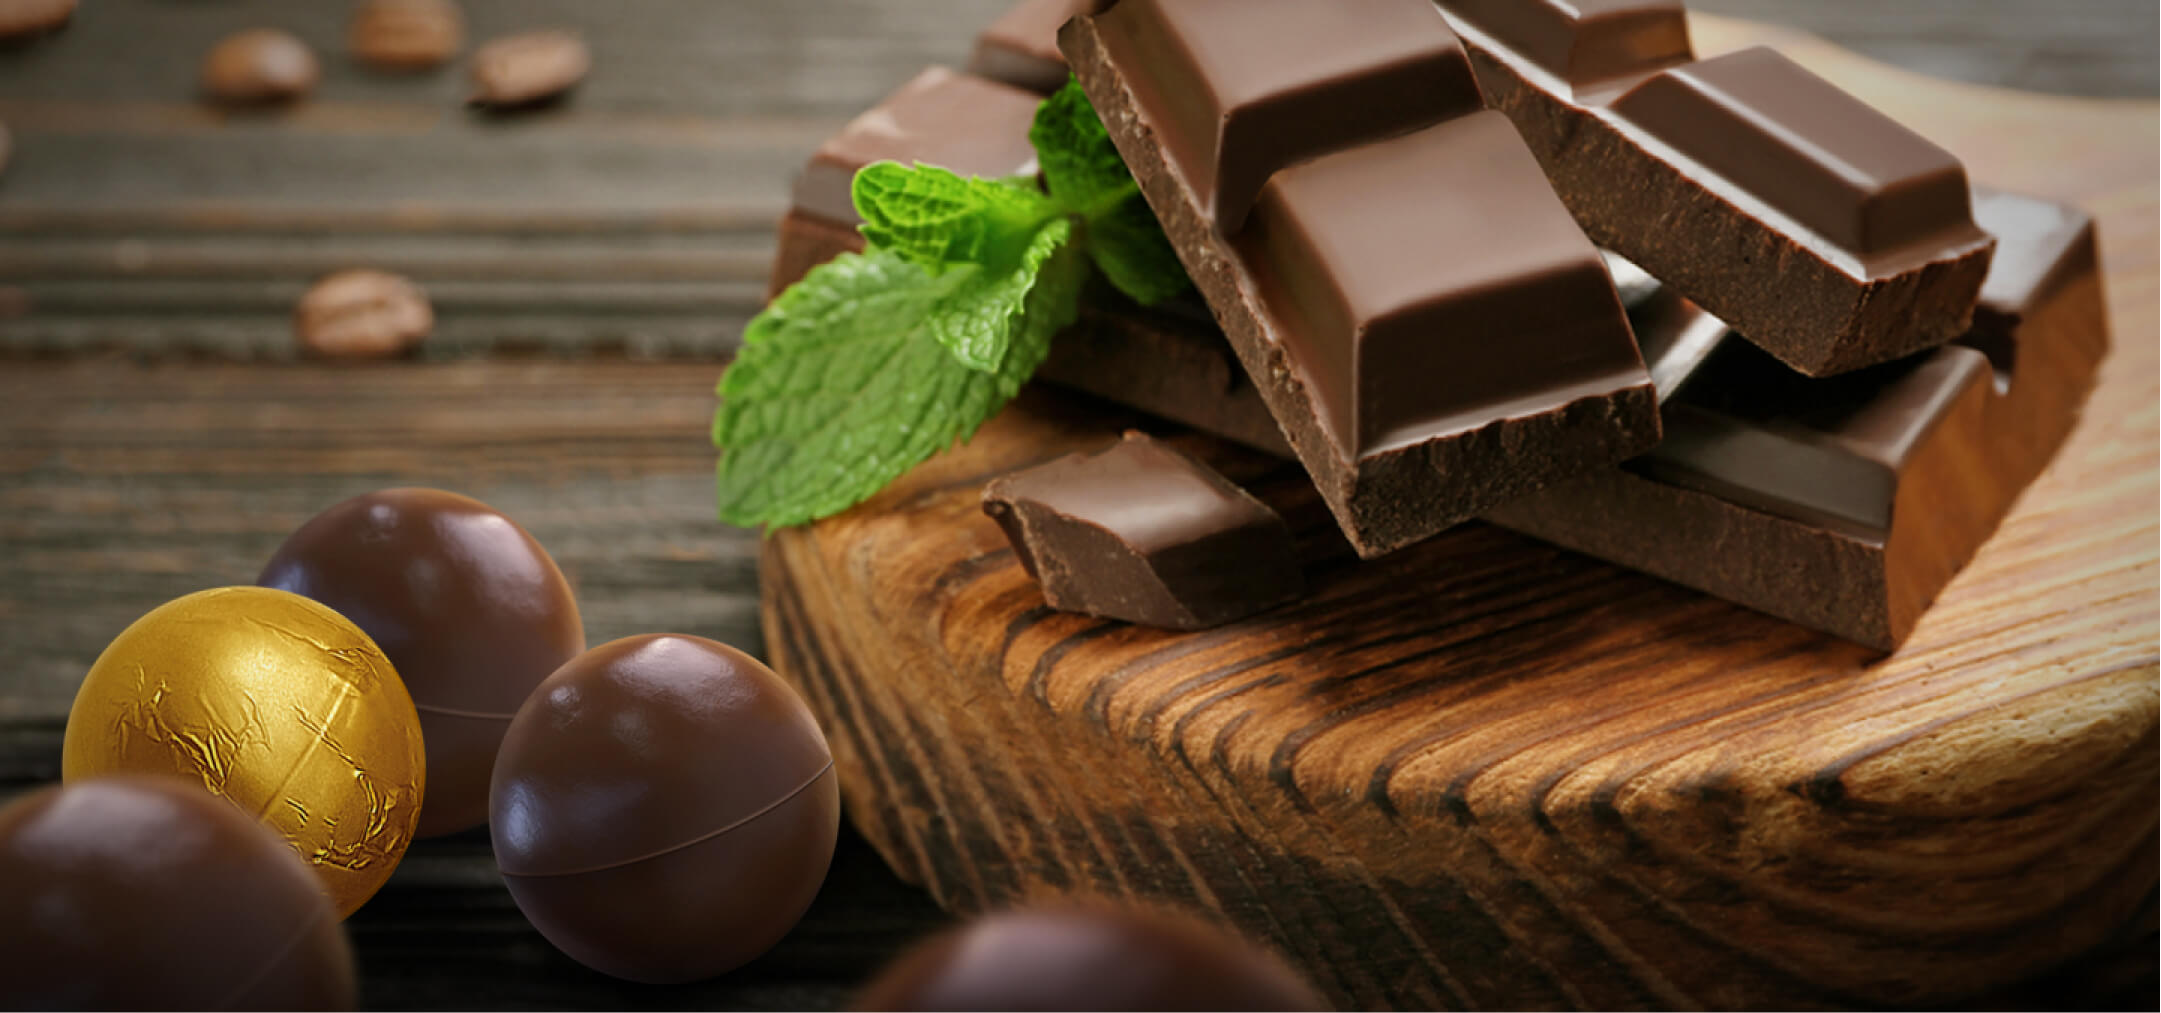 We are a planter, procurer, and maker of Pure & Tropical chocolates for over 3 decades.